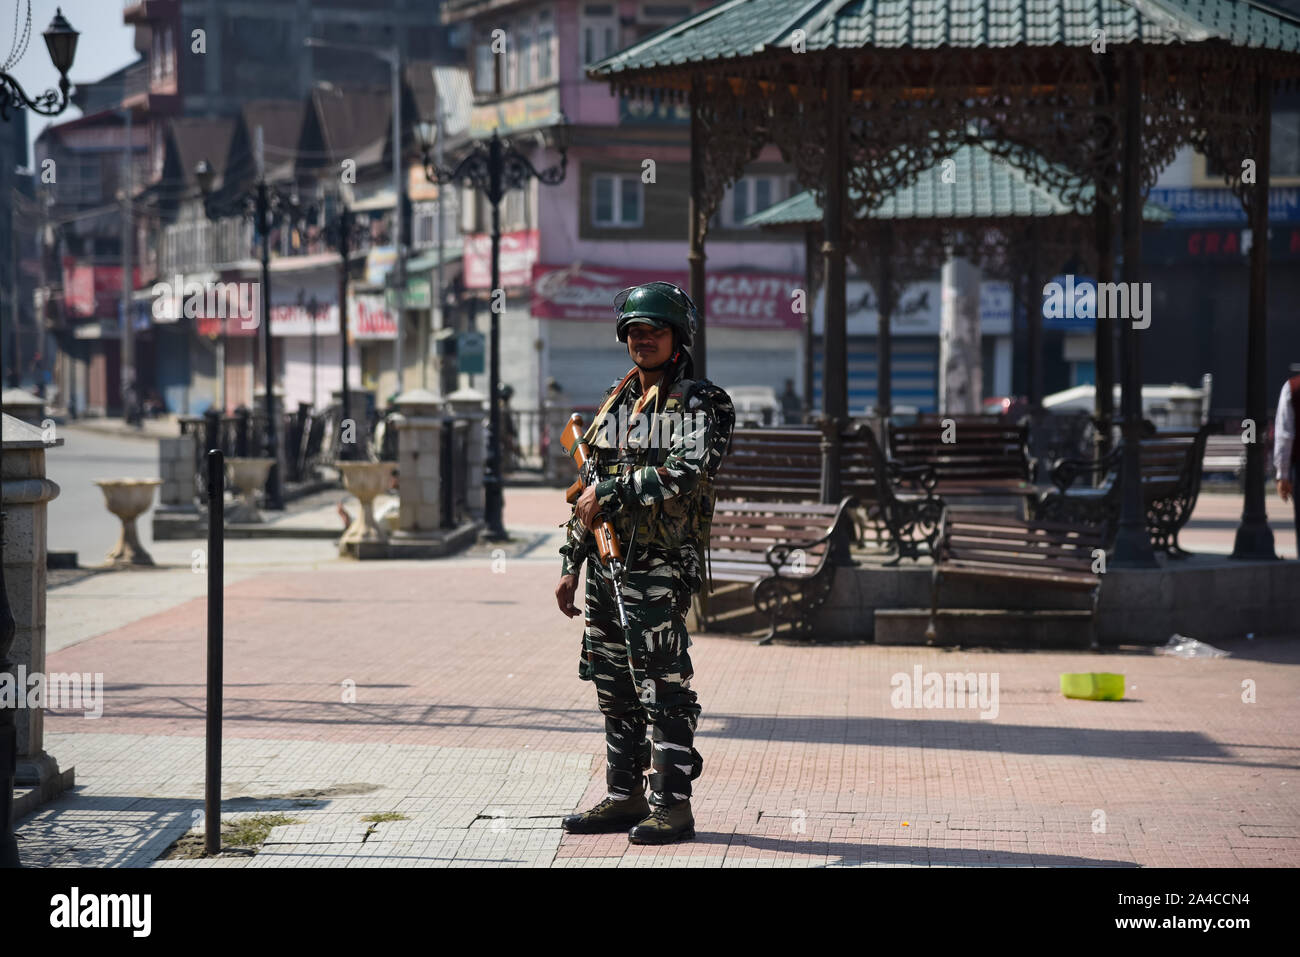 Srinagar, India. 11th Oct, 2019. A para military trooper stands guard during the demonstration.After Friday prayers hundreds of people took part in a demonstration in the Soura neighborhood. Tensions have been escalating since the Indian government removed the region's partial autonomy three weeks ago. Information has also been scarce, as internet and mobile networks have been blocked. Credit: SOPA Images Limited/Alamy Live News Stock Photo